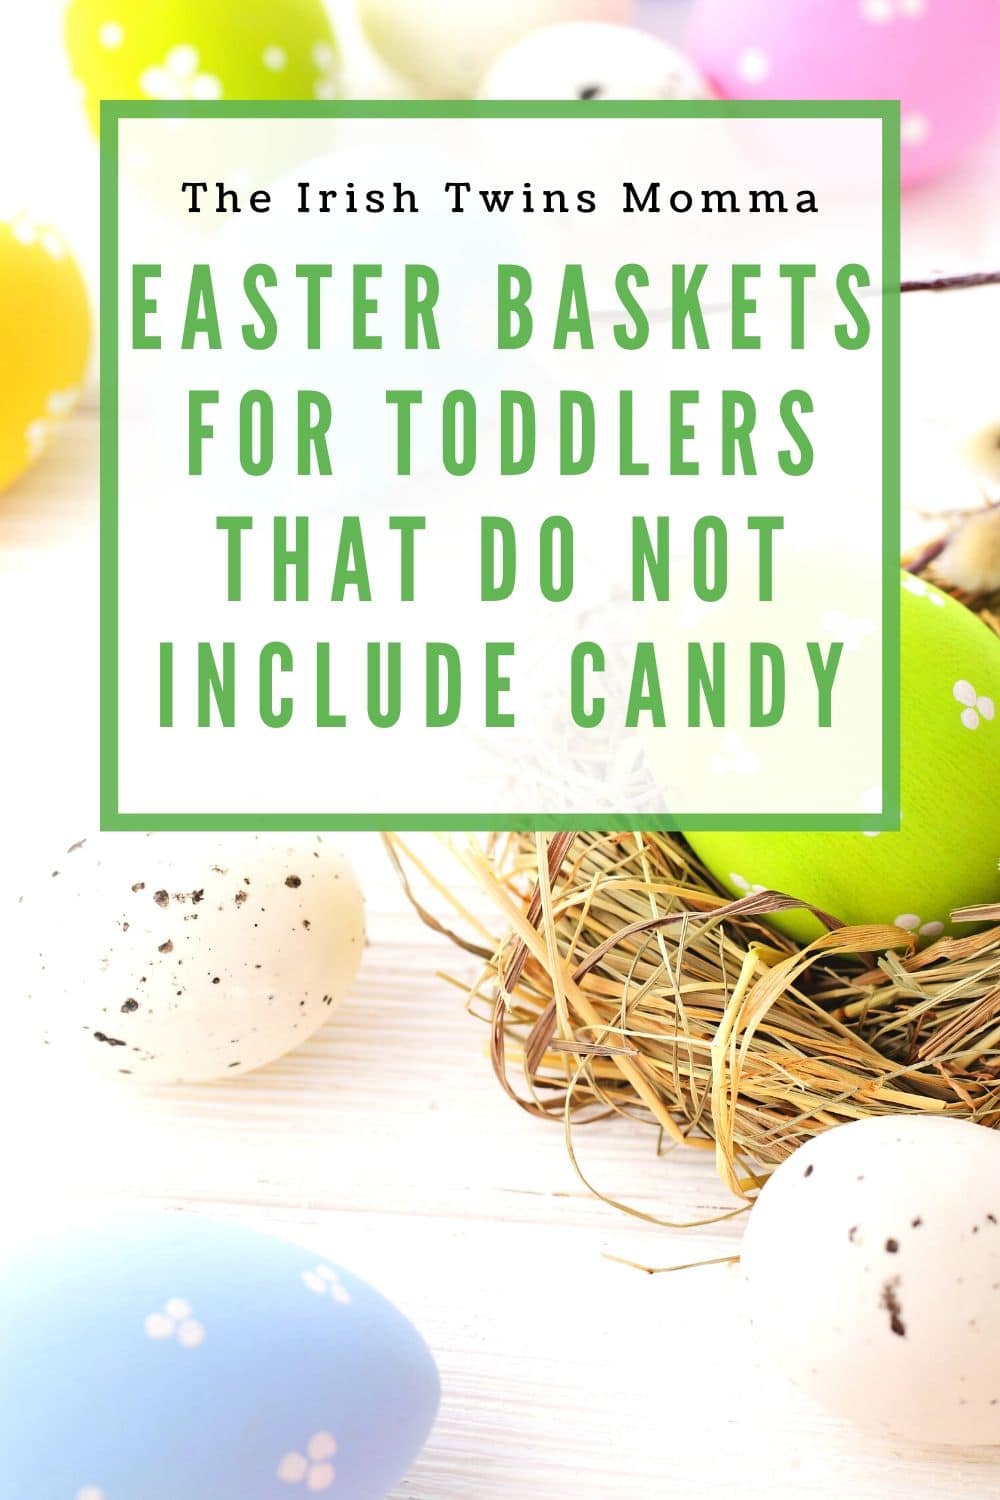 Good ideas for Easter baskets that do not include chocolate for toddlers that include some reasonable priced games and toys to keep them busy this spring. via @irishtwinsmom11